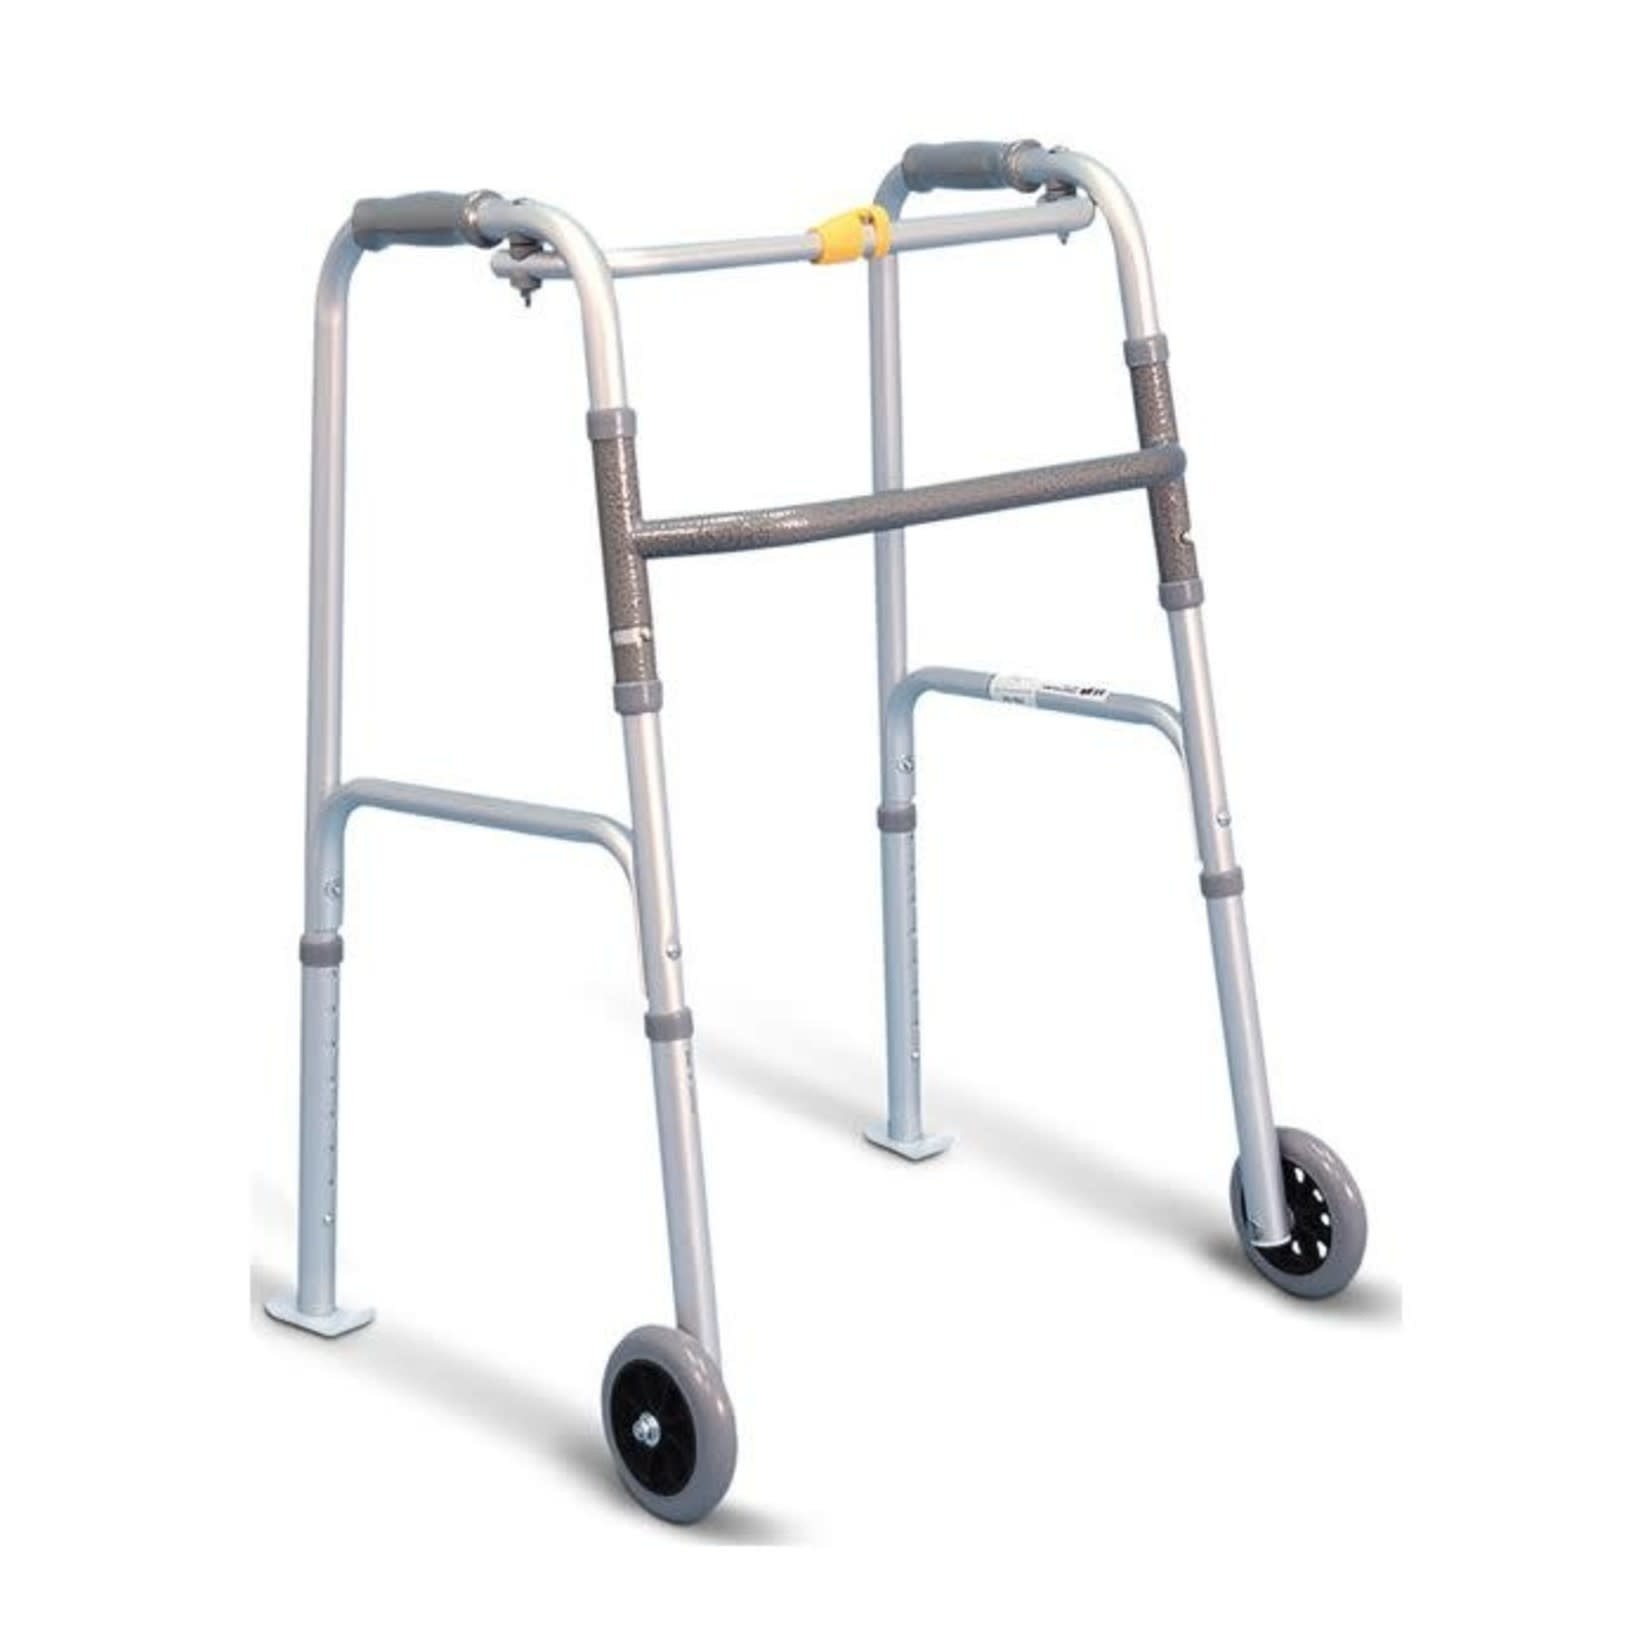 Pro-Aide Walker with wheels & skis - 1 button